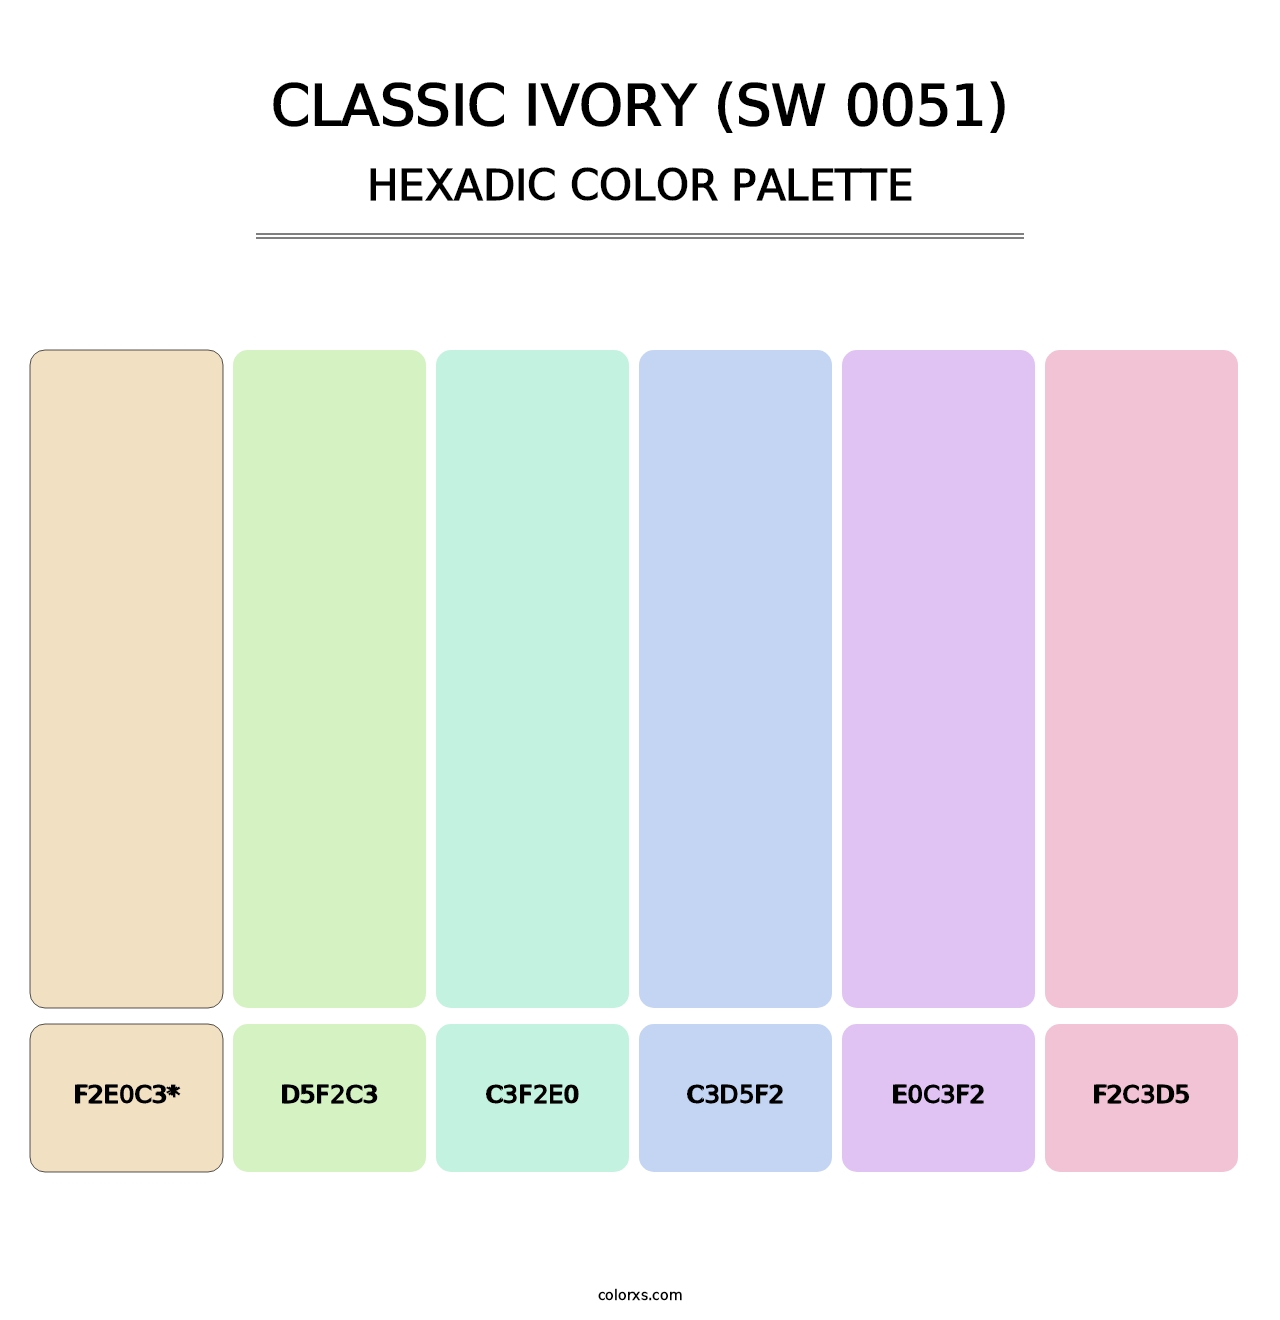 Classic Ivory (SW 0051) - Hexadic Color Palette